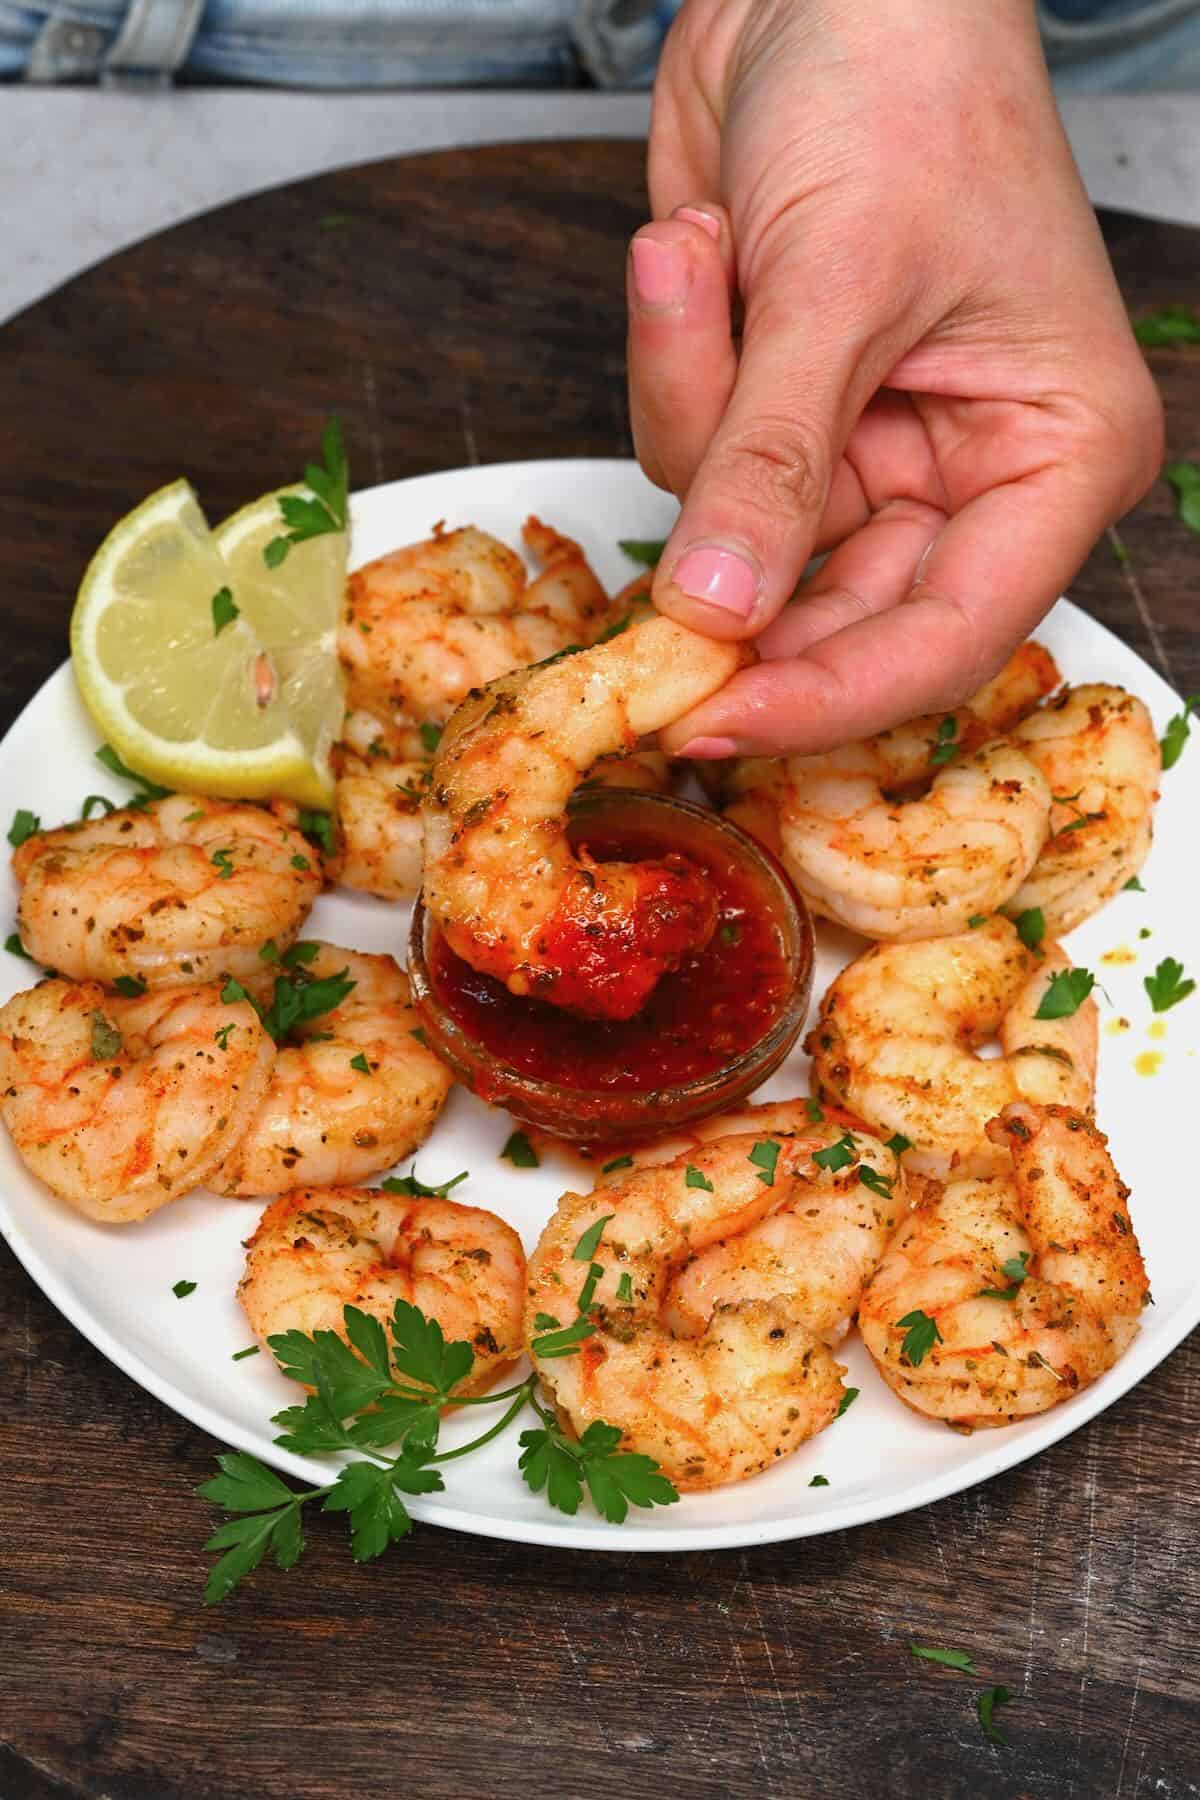 Dipping air fried shrimp in red sauce